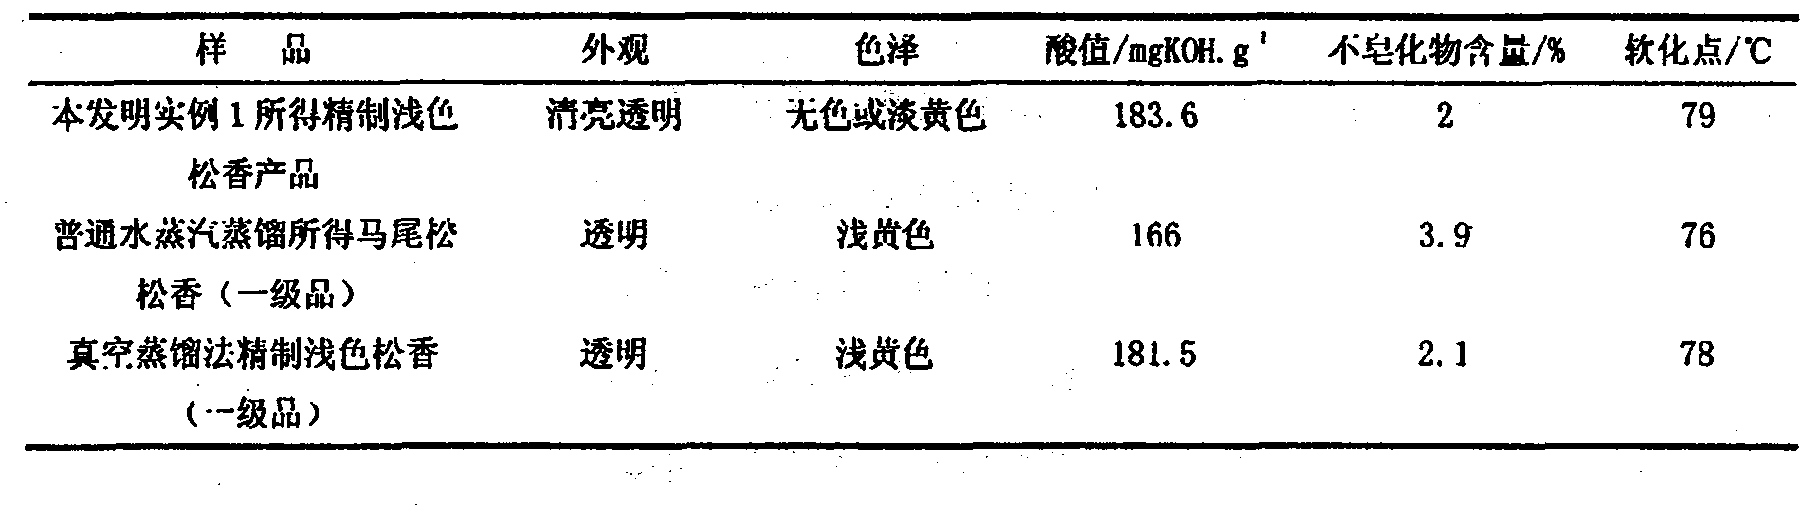 Method for producing refined light-color rosin by using turpentine as raw material